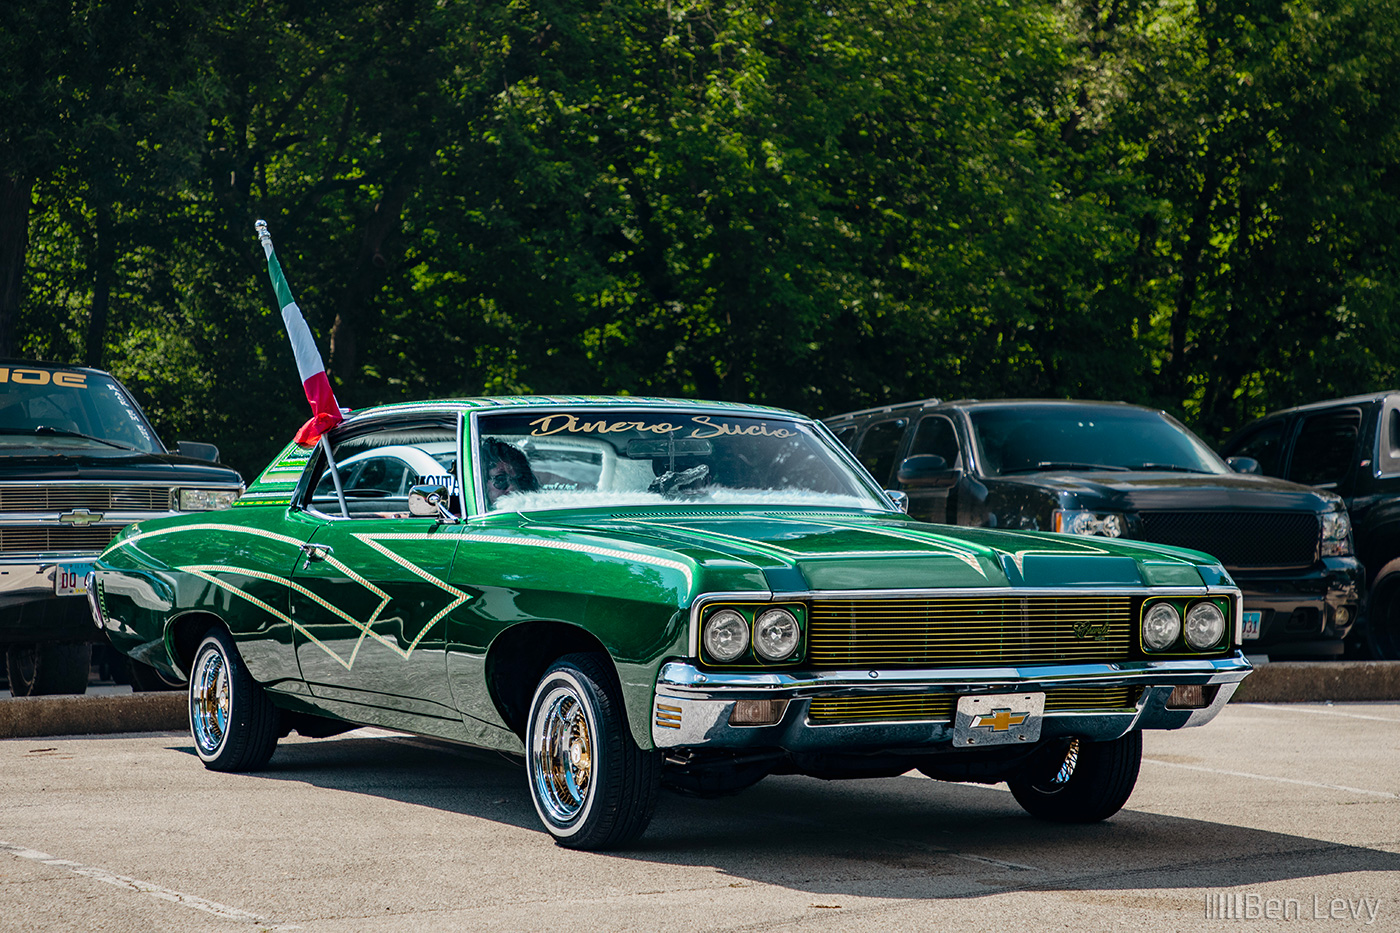 Green Chevrolet Caprice at Streets Summer Jam Picnic in Chicago